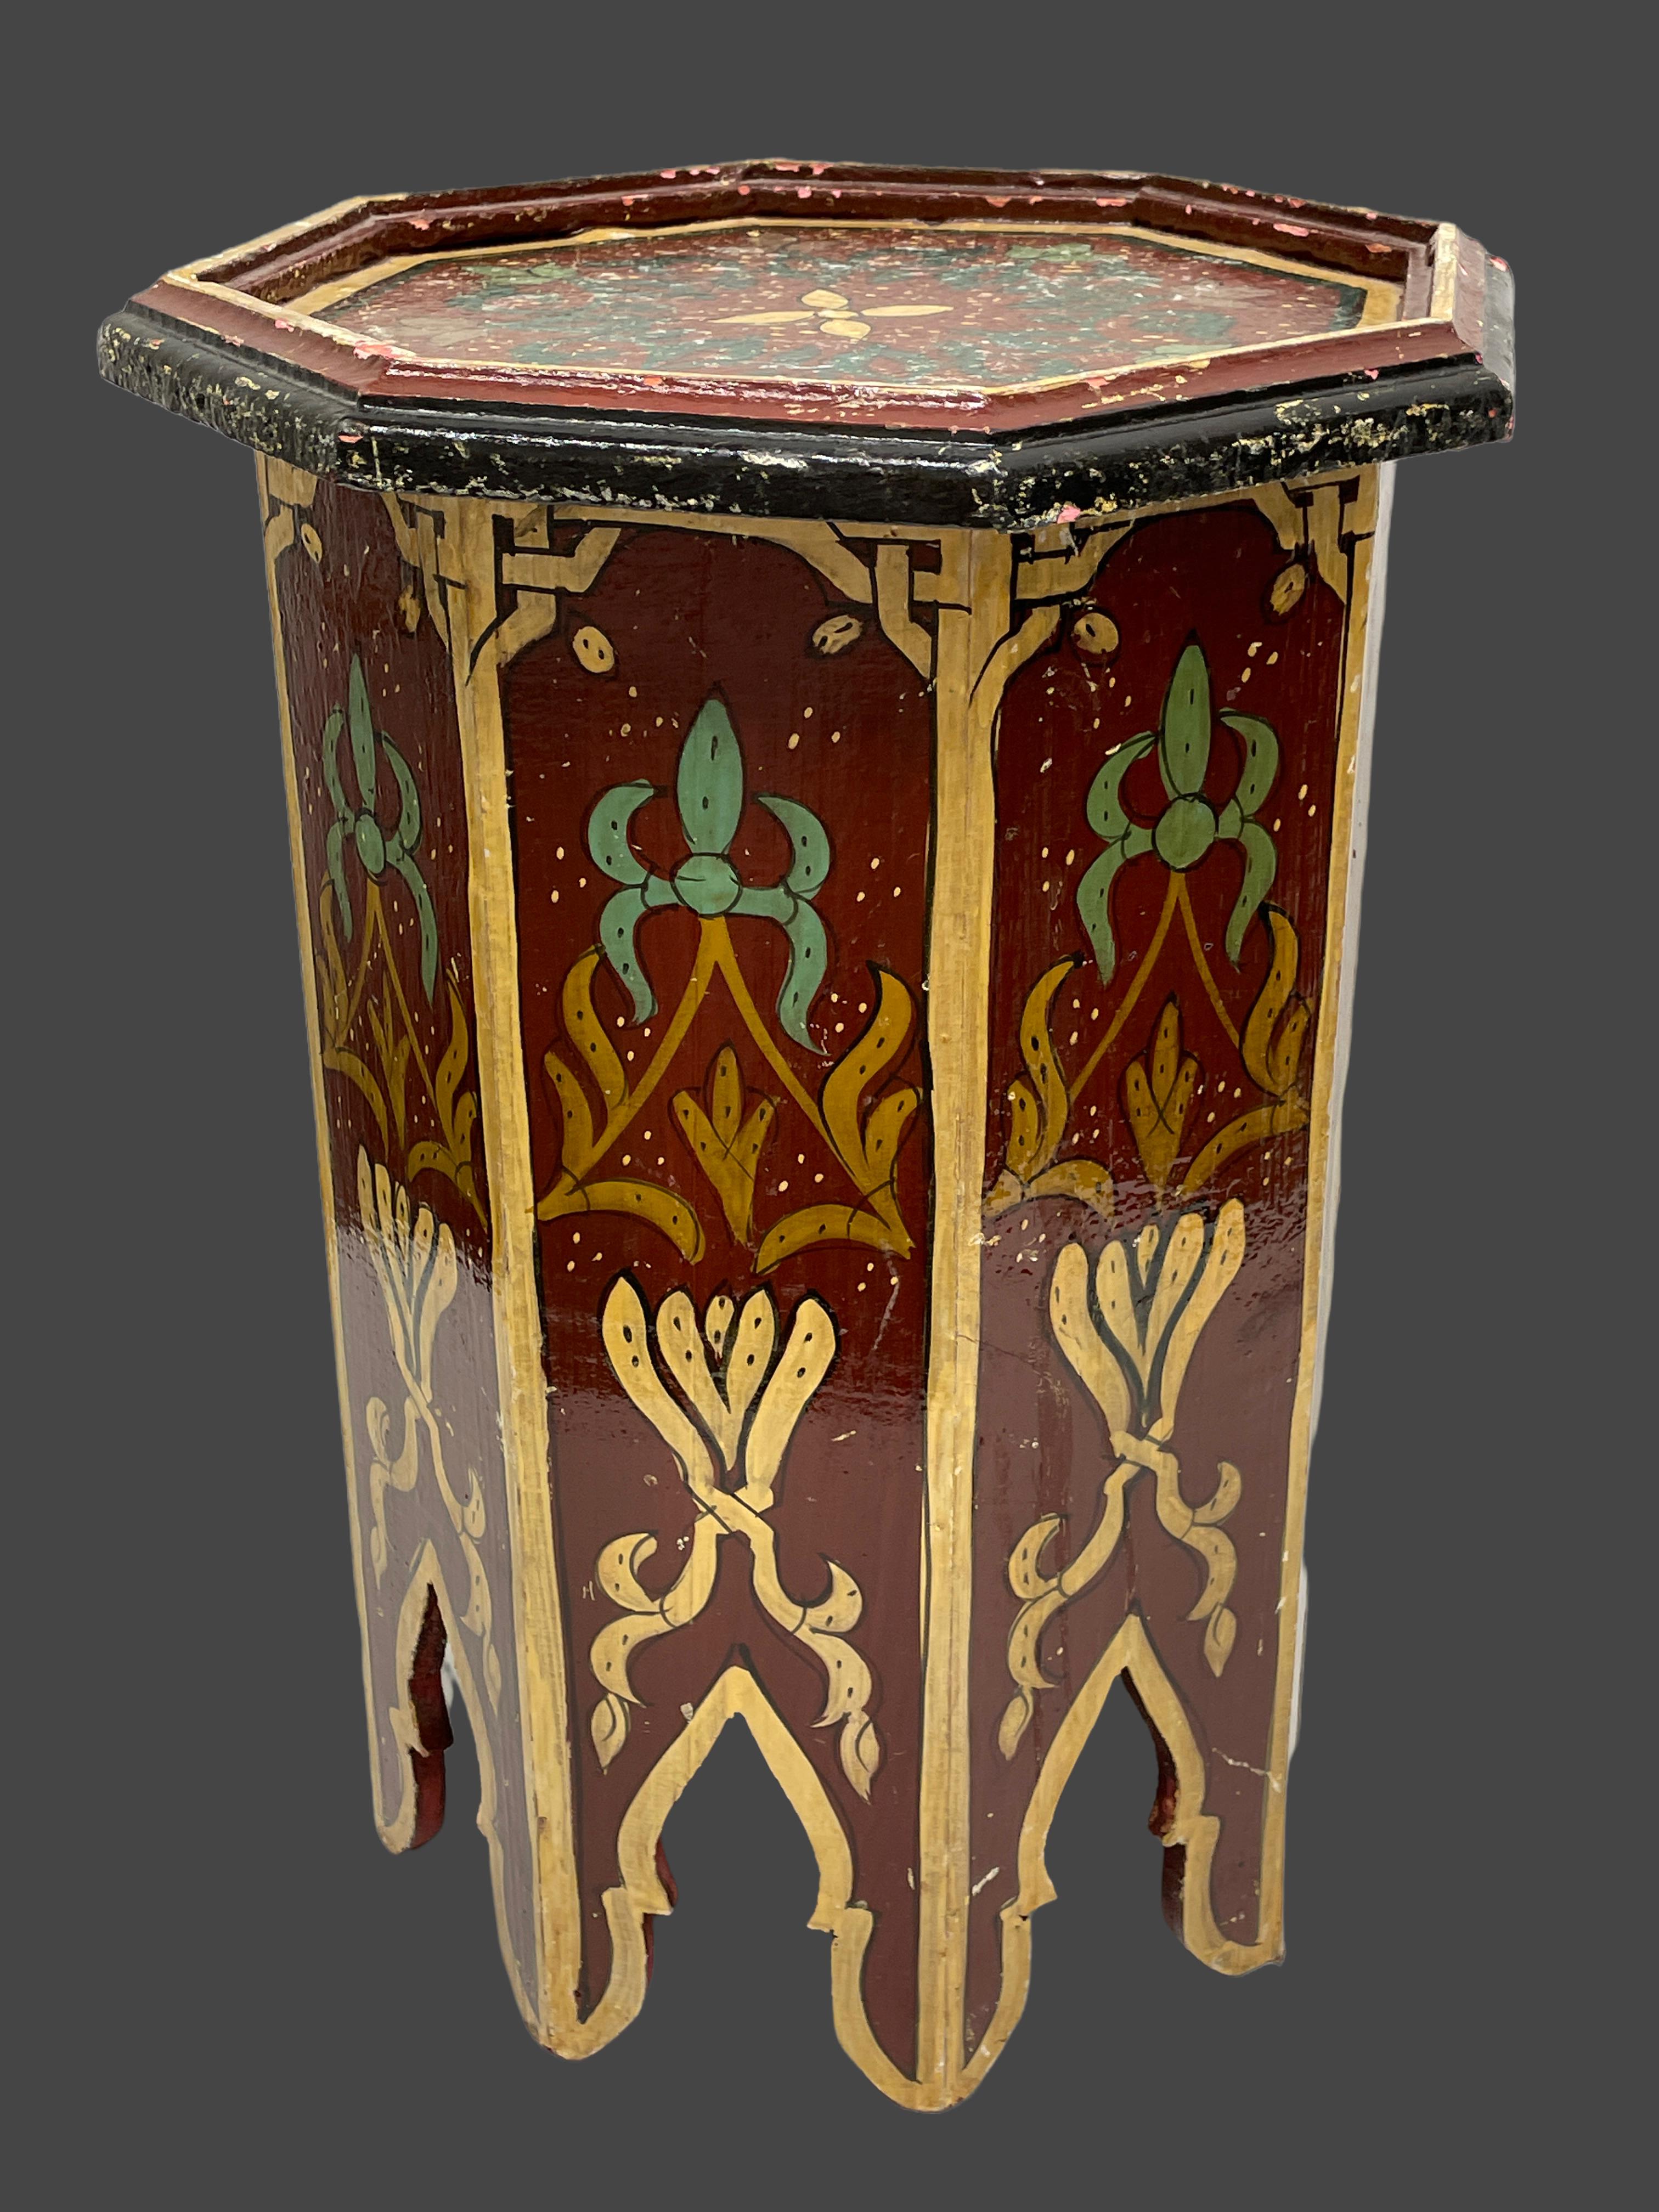 Moroccan Style Diminutive Painted Hexagonal Table 2